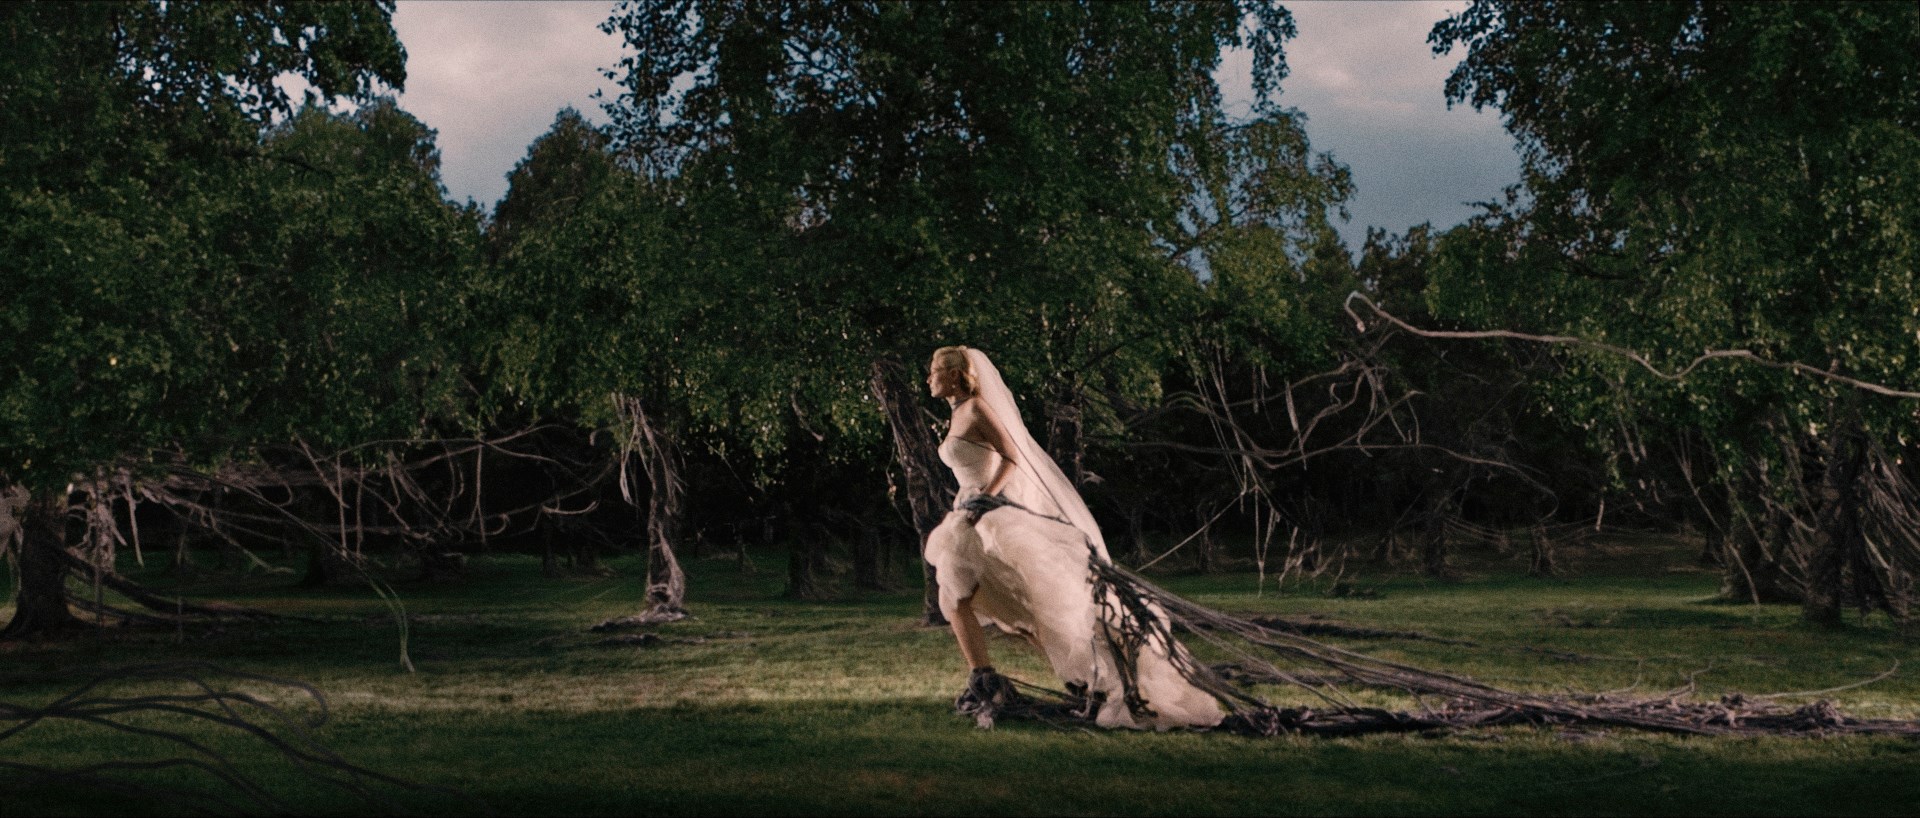 Melancholia (2011) – the visually striking overture, an eerie dreamscape & an exquisite cinematic symphony of death